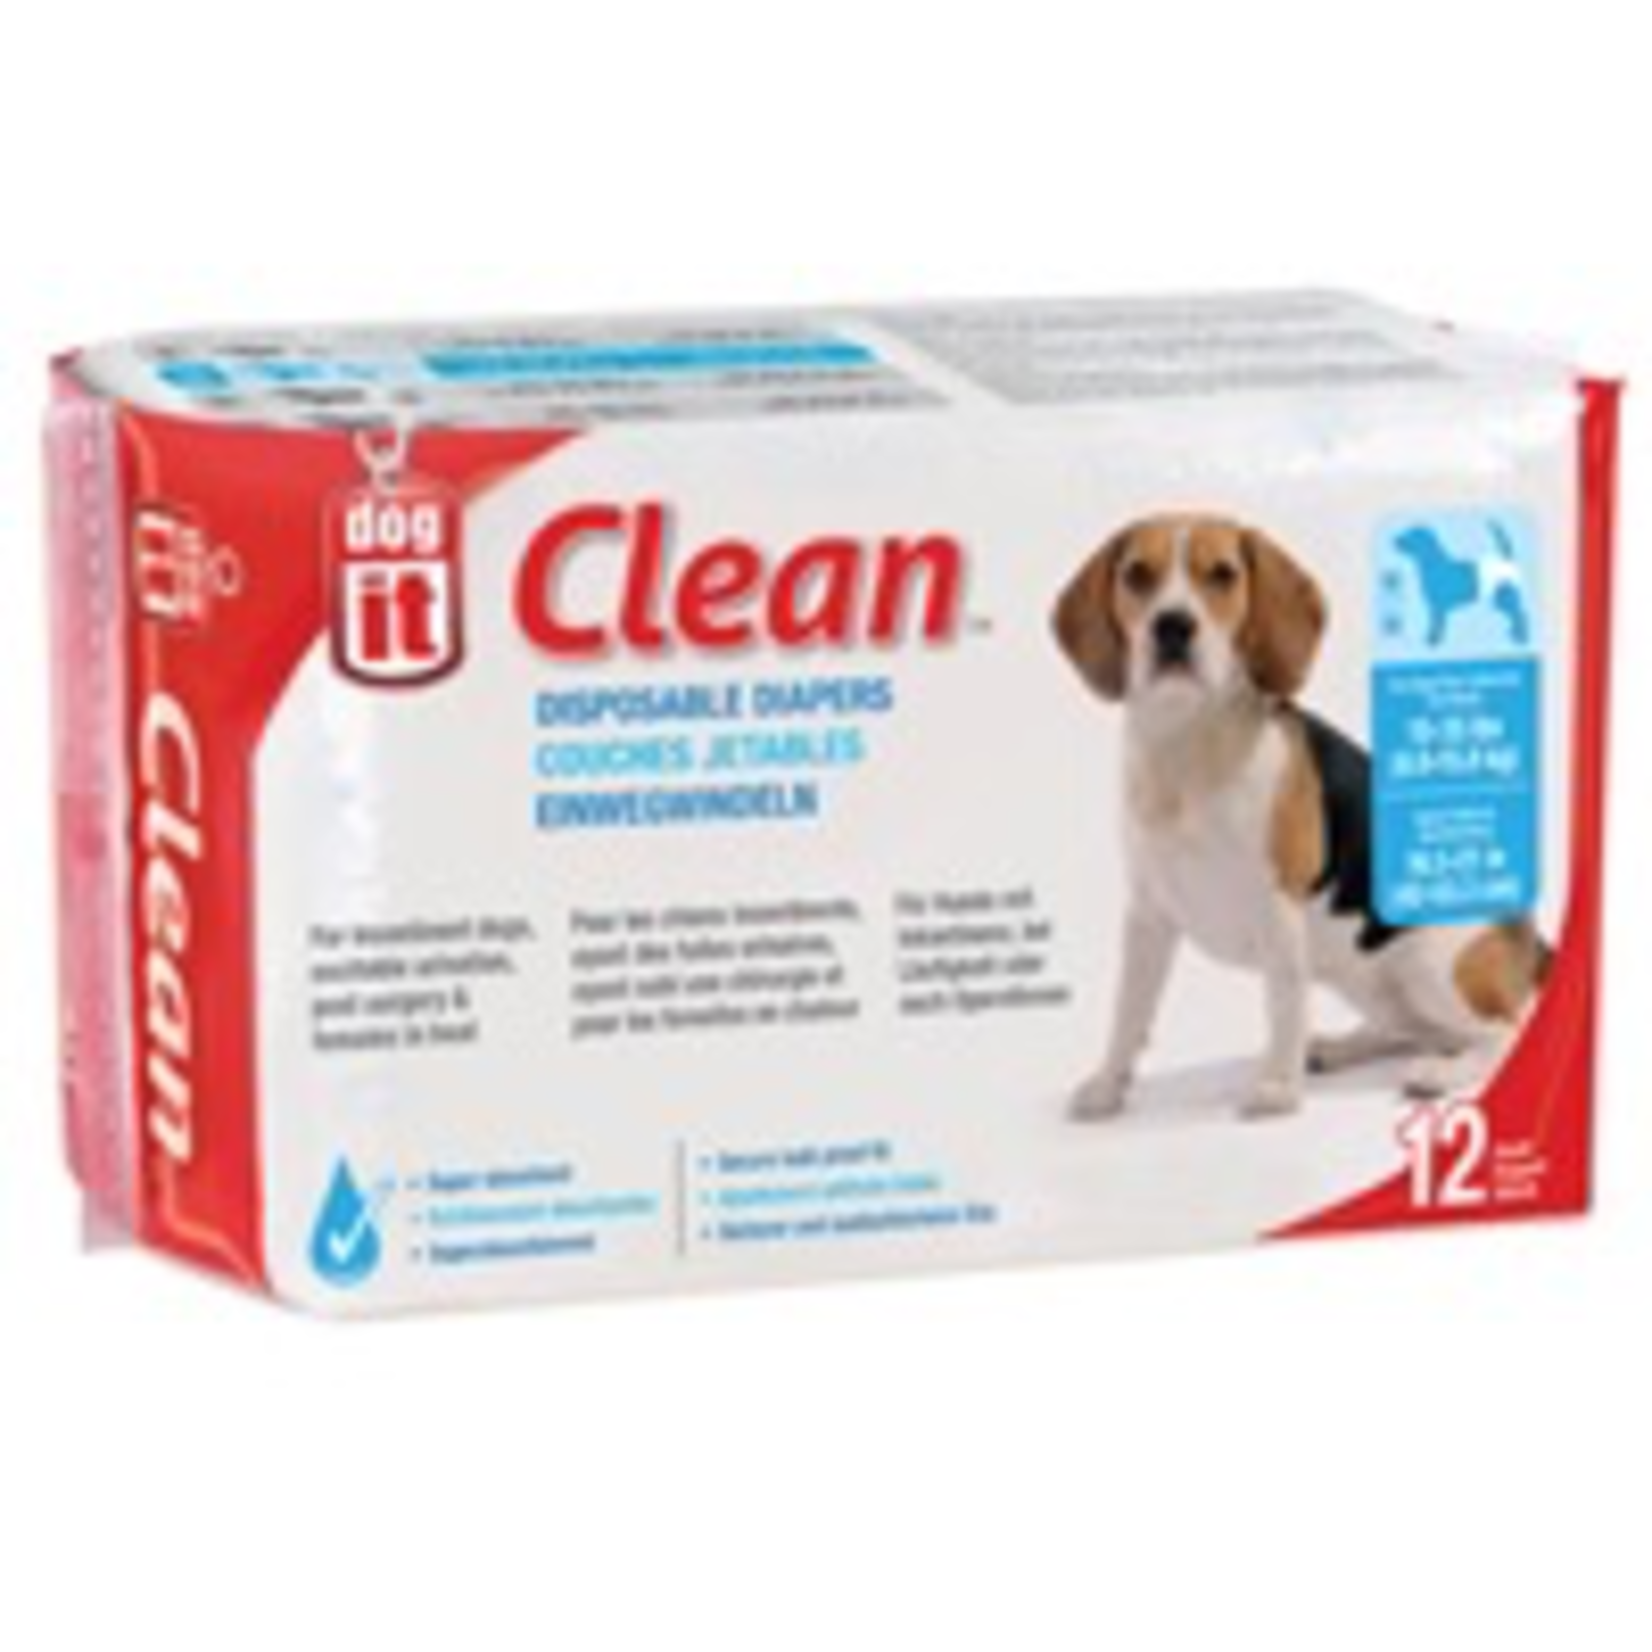 DOG IT Dogit Diapers - Medium - 15-35 lbs and waist 16.5-21 in - 12 pack